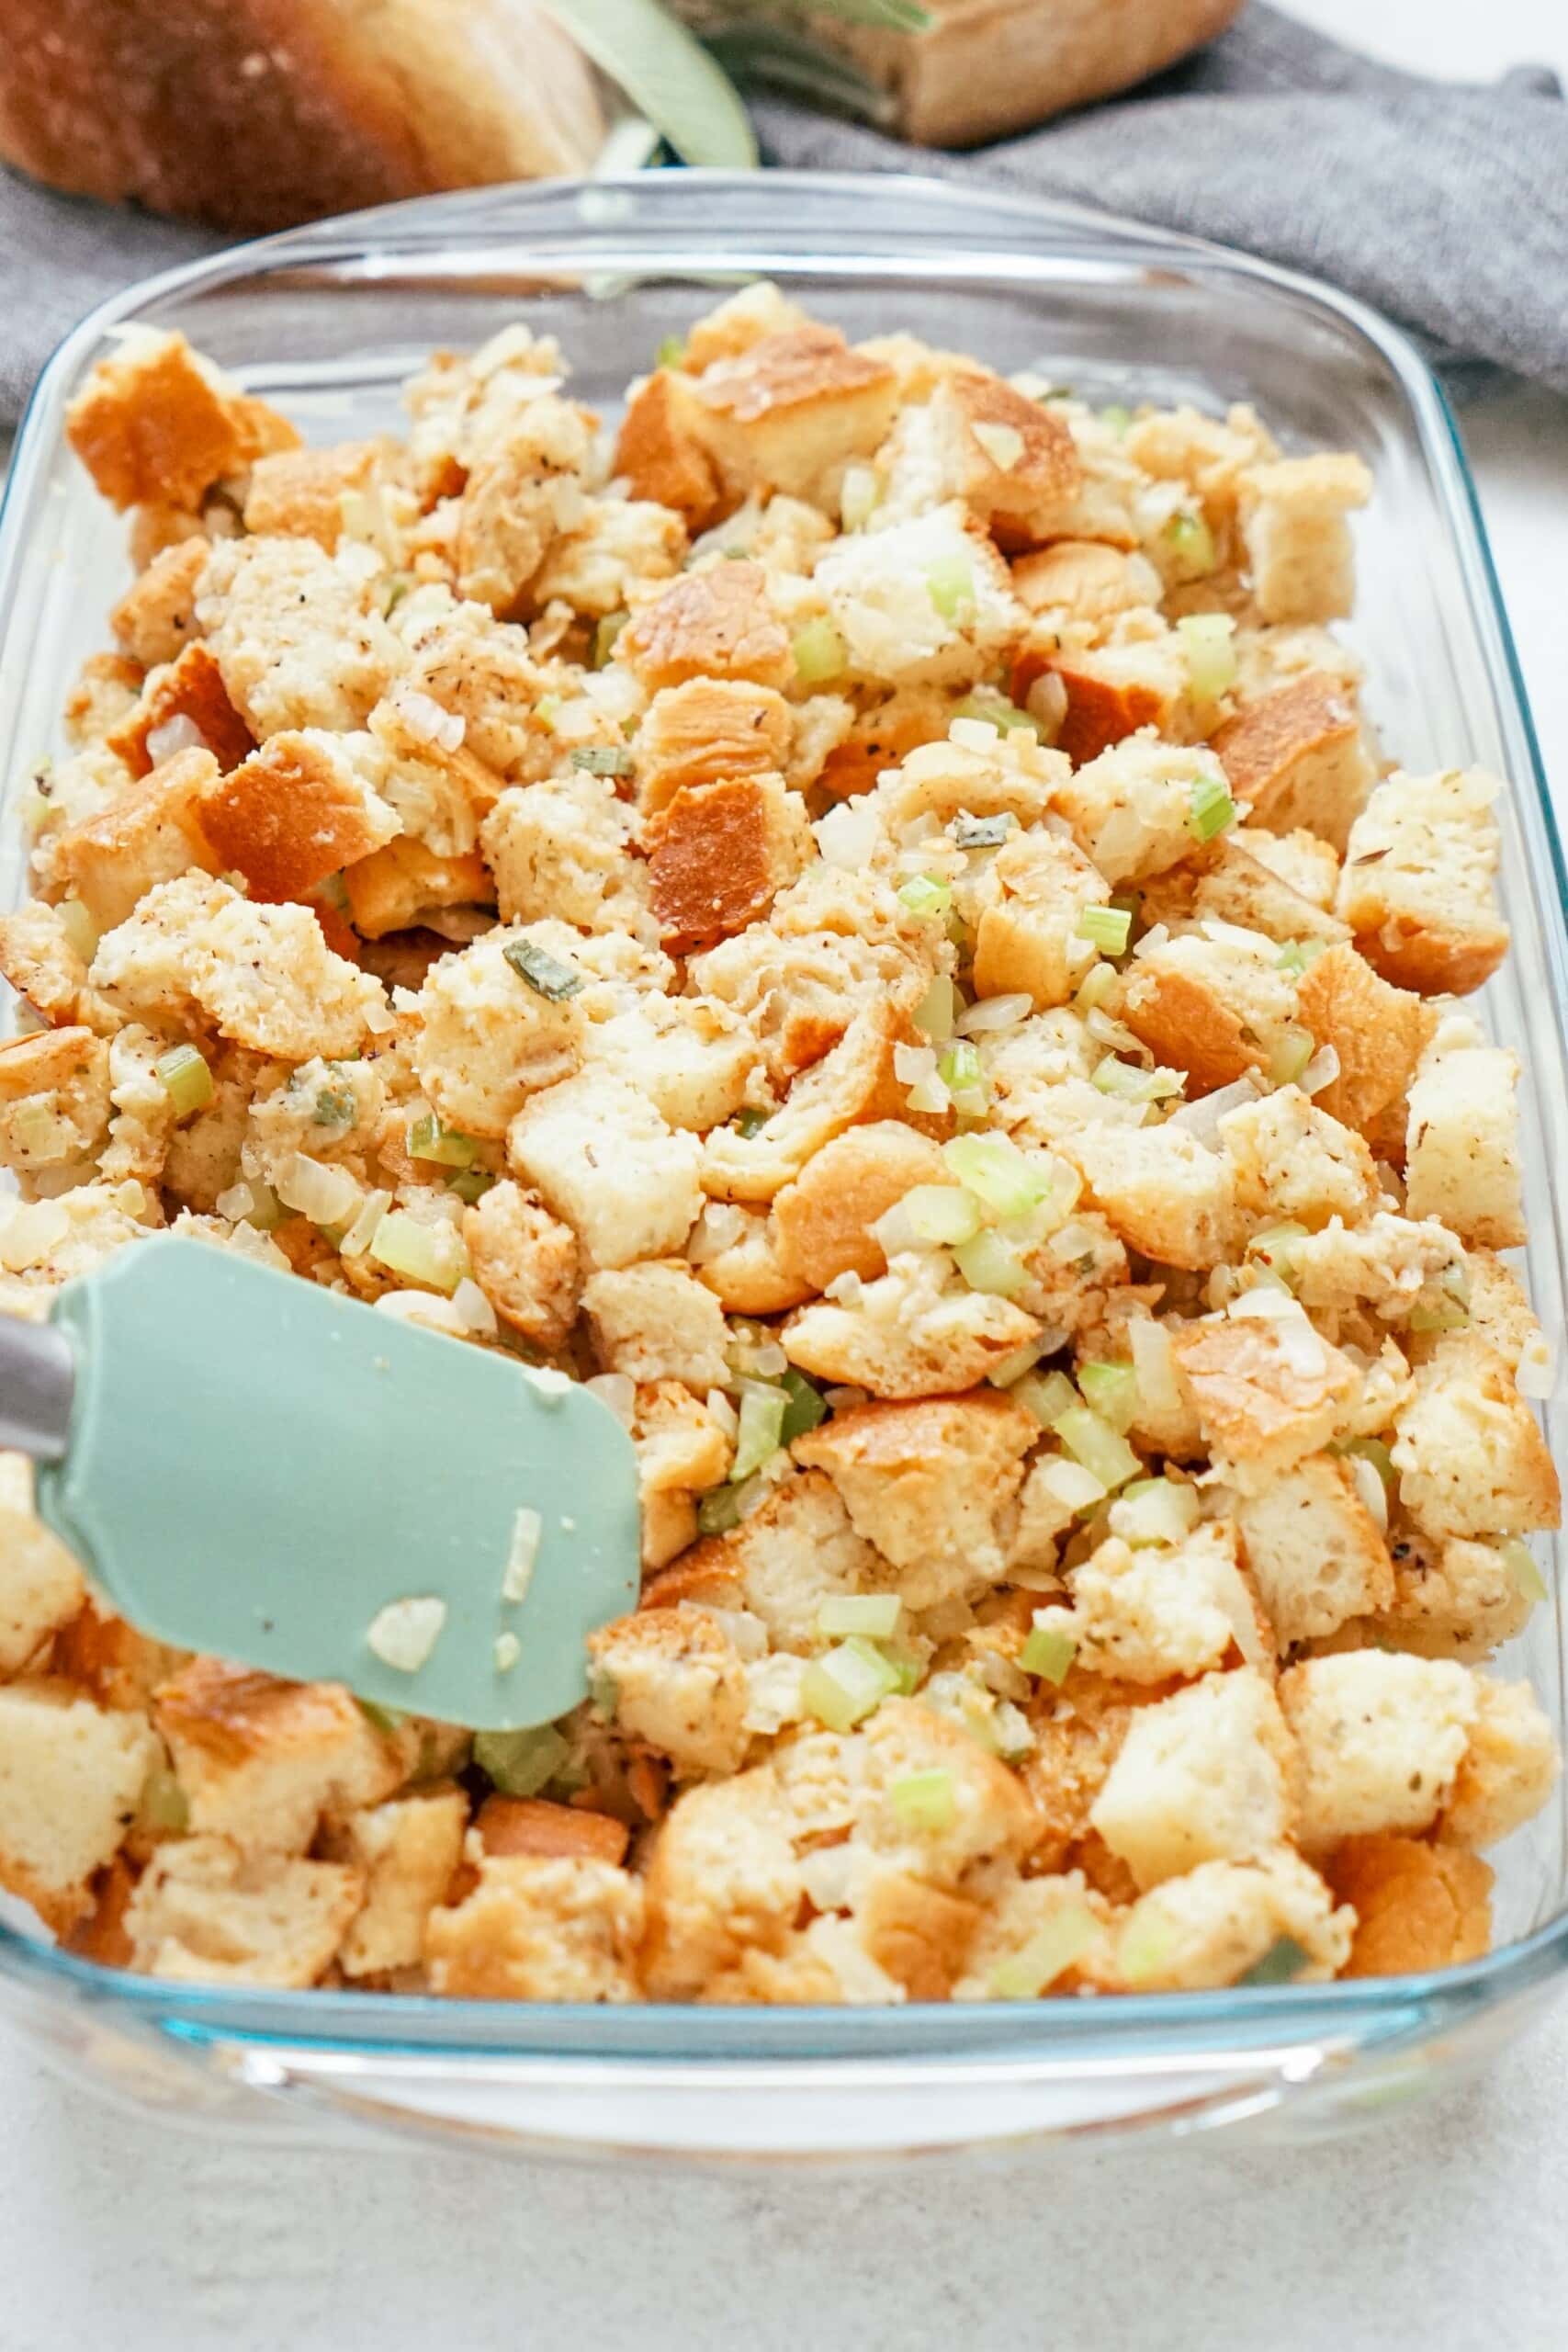 stuffing mixture spread into baking dish